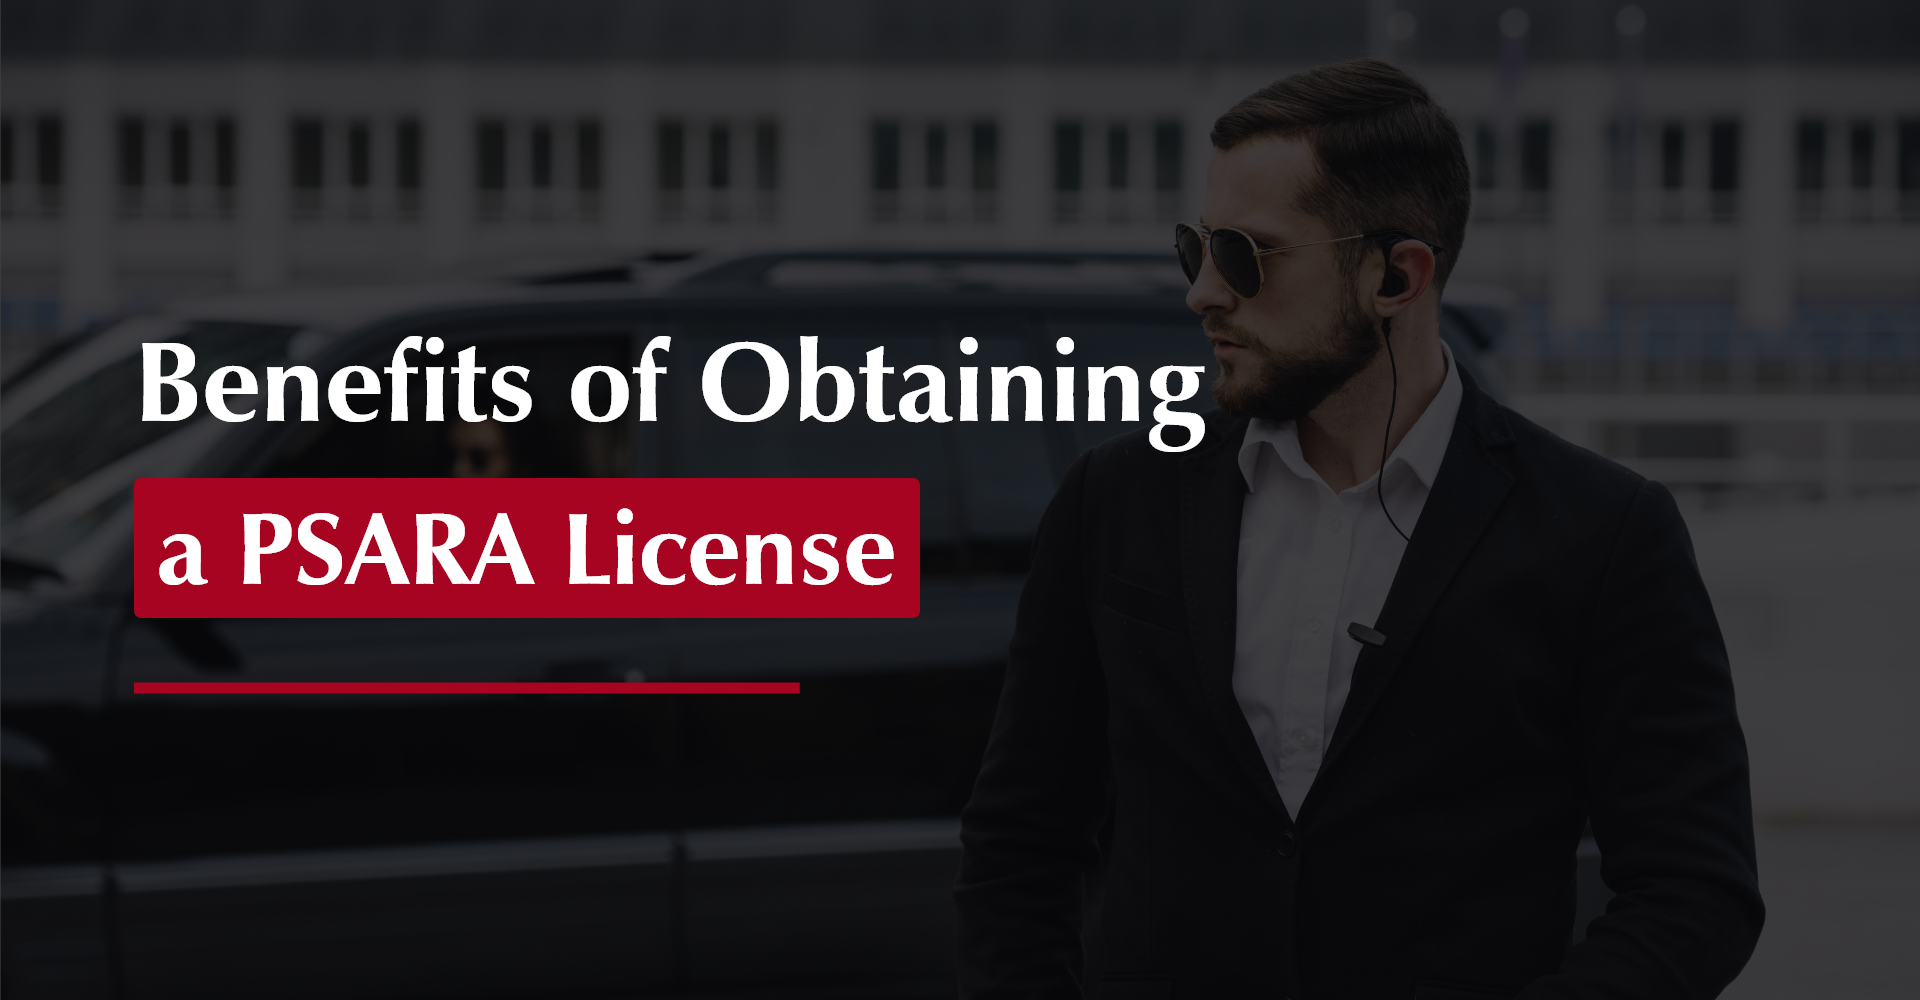 Benefits of Obtaining a PSARA License